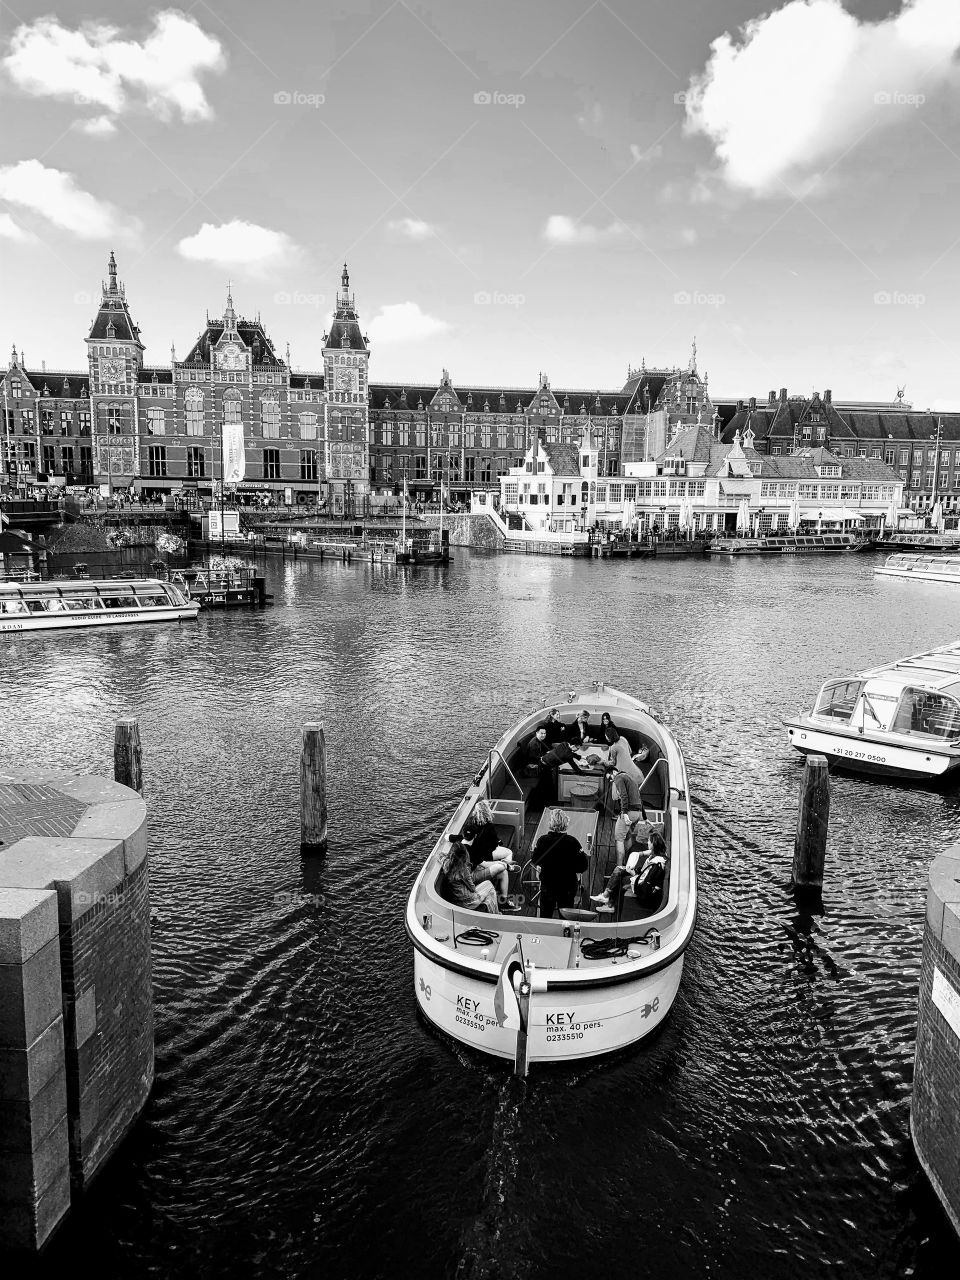 Amsterdam Centraal Station and Canals